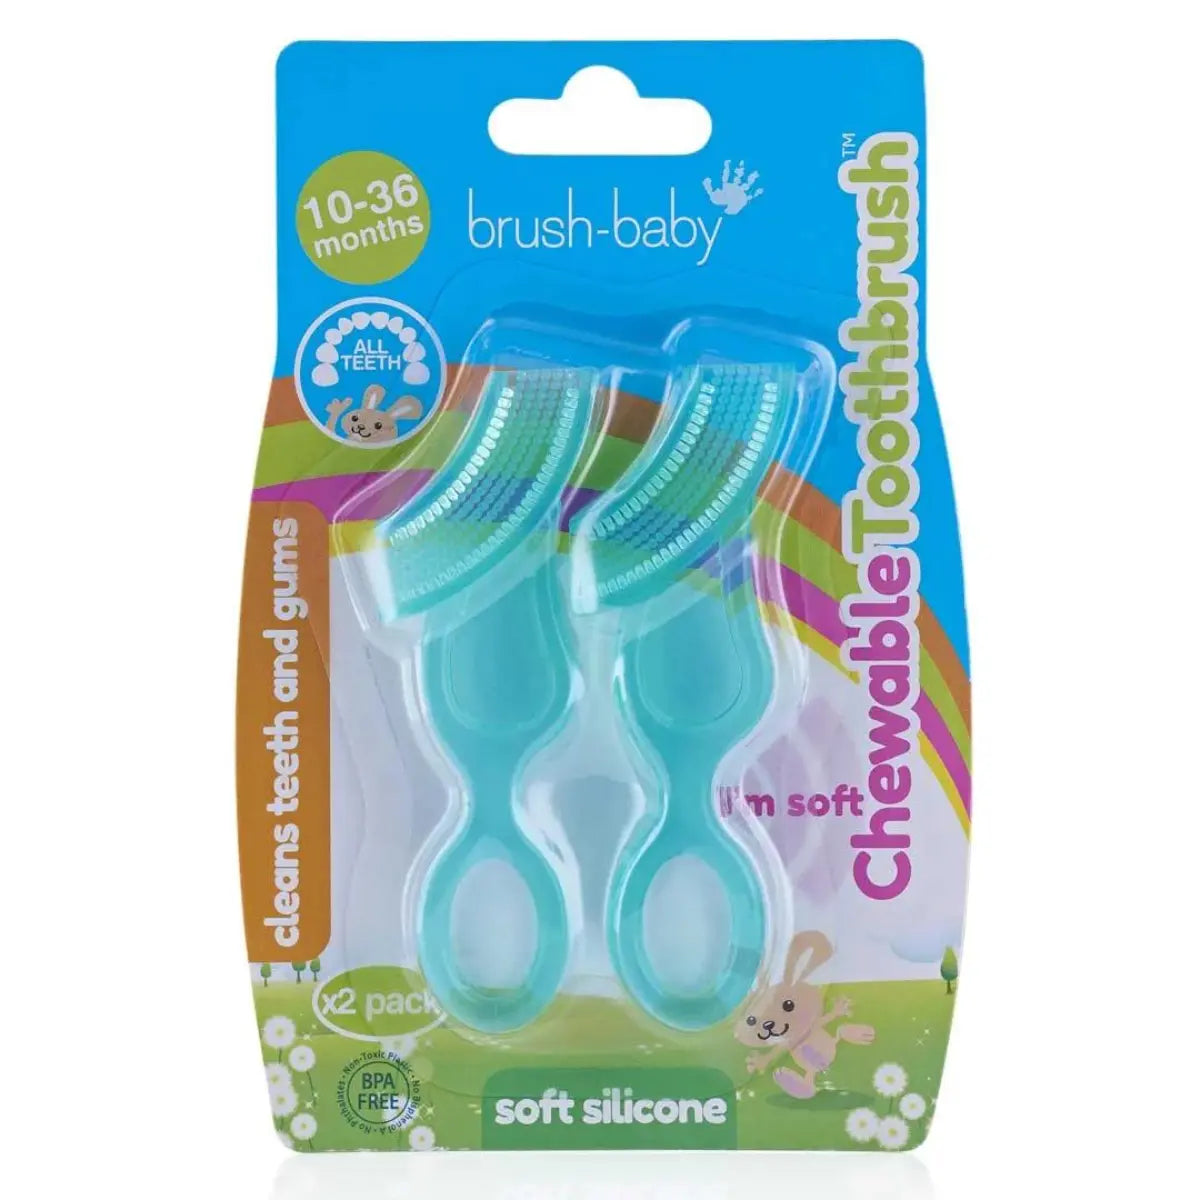 double award-winning and innovative silicone baby first toothbrush and baby teether packaging